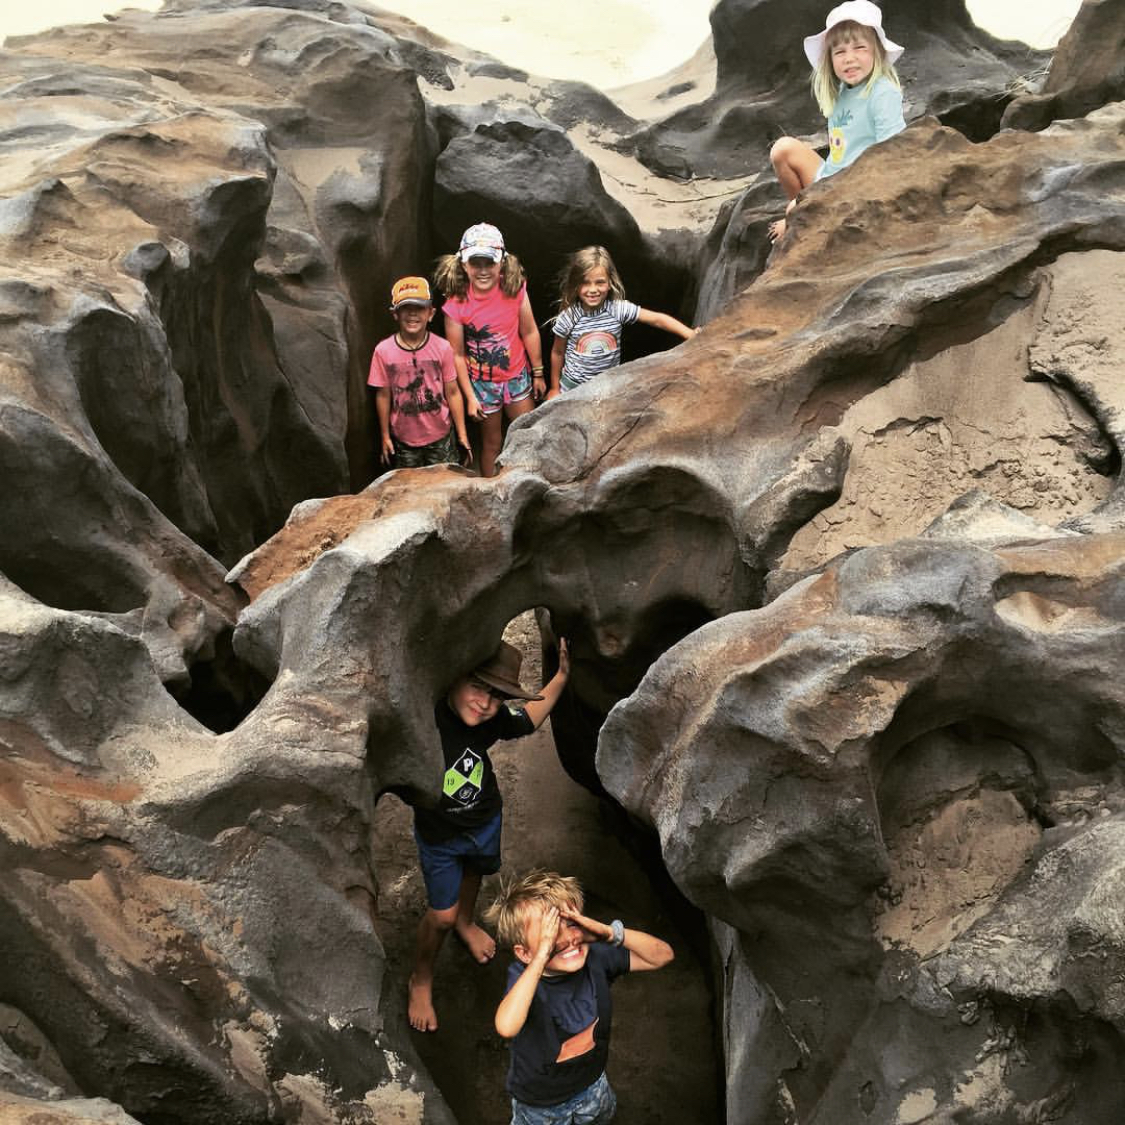 Playing in the ‘coffee’ rocks at Ngala Rocks. The kids will get filthy as coffee rock is very dark and crumbly, but they will have so much fun!